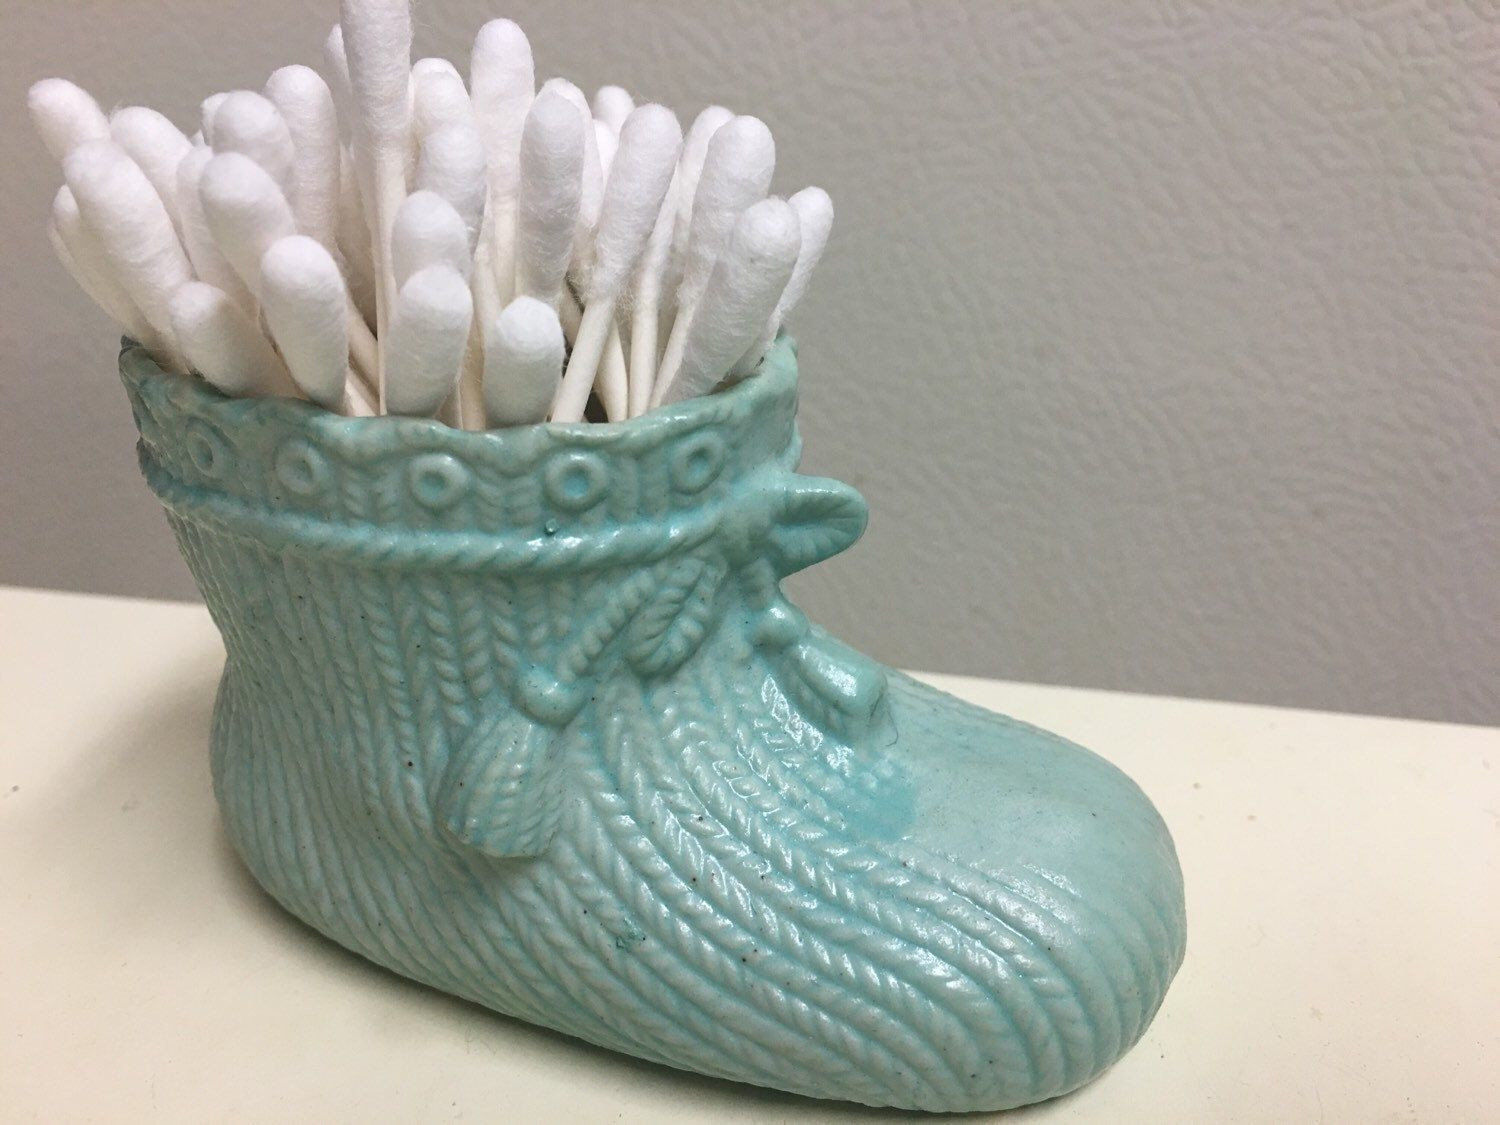 11 Fantastic Ceramic Boot Vase 2024 free download ceramic boot vase of a personal favorite from my etsy shop https www etsy com listing regarding occupied japan baby boot vase holder very cute porcelain teal baby shower gift